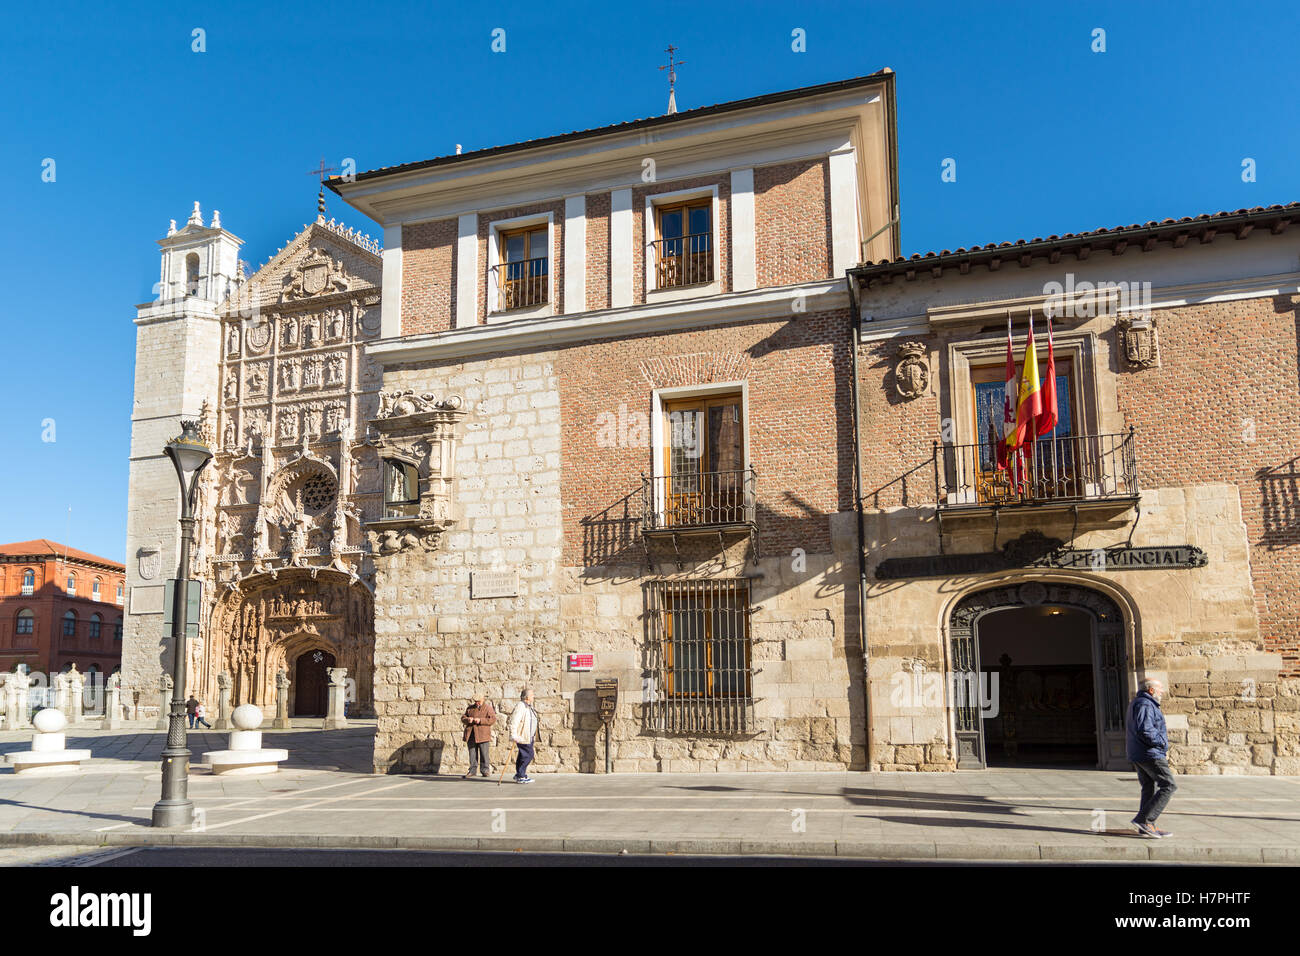 VALLADOLID, SPAIN - NOVEMBER 7, 2016: Valladolid Pimentel Palace. Birthplace of King Philip II. Example of palatial architecture Stock Photo